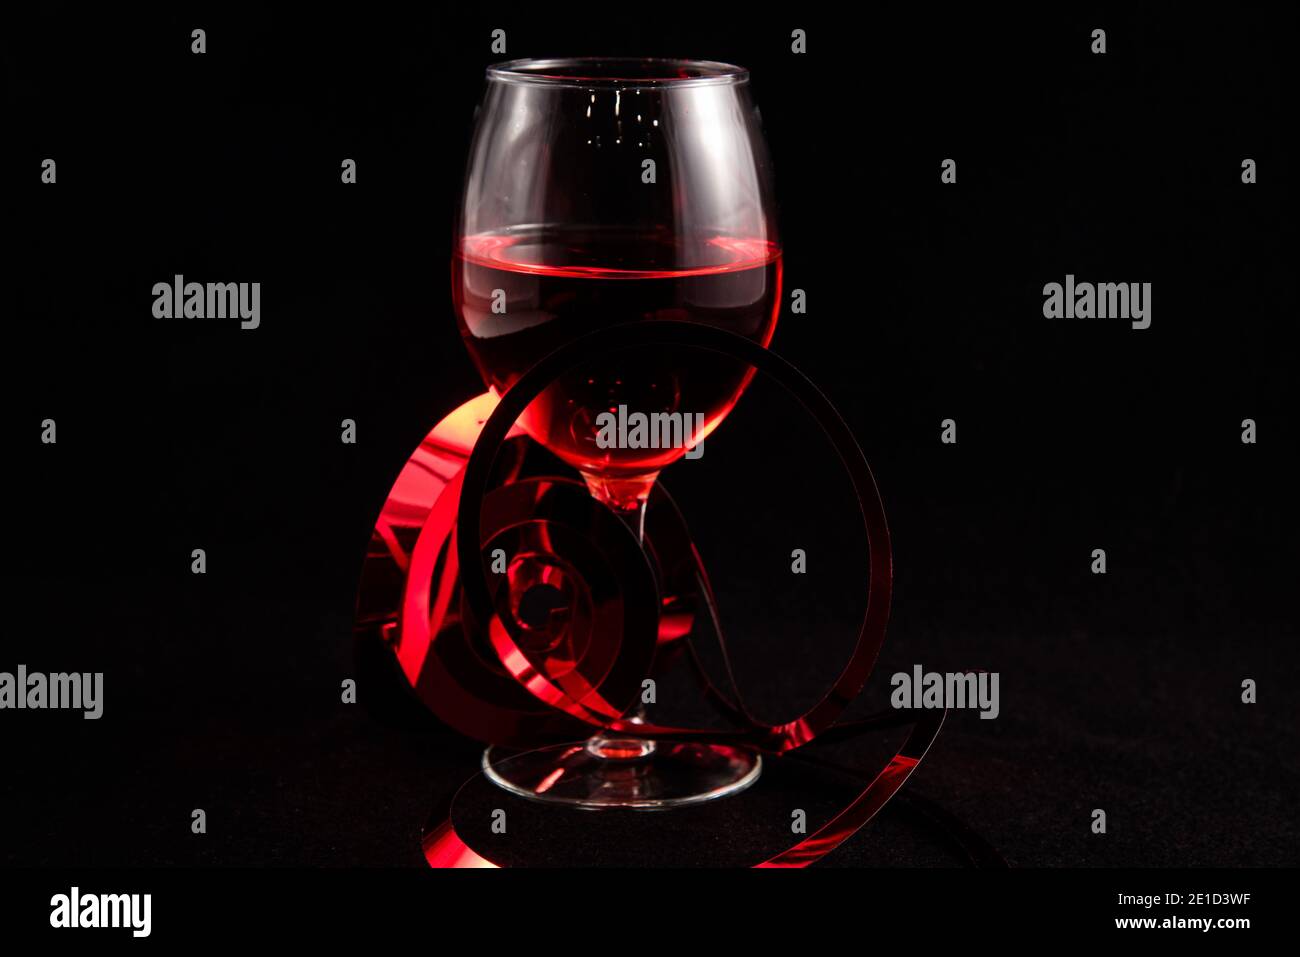 Single wine glass with Valentine hearts against a black background. Stock Photo